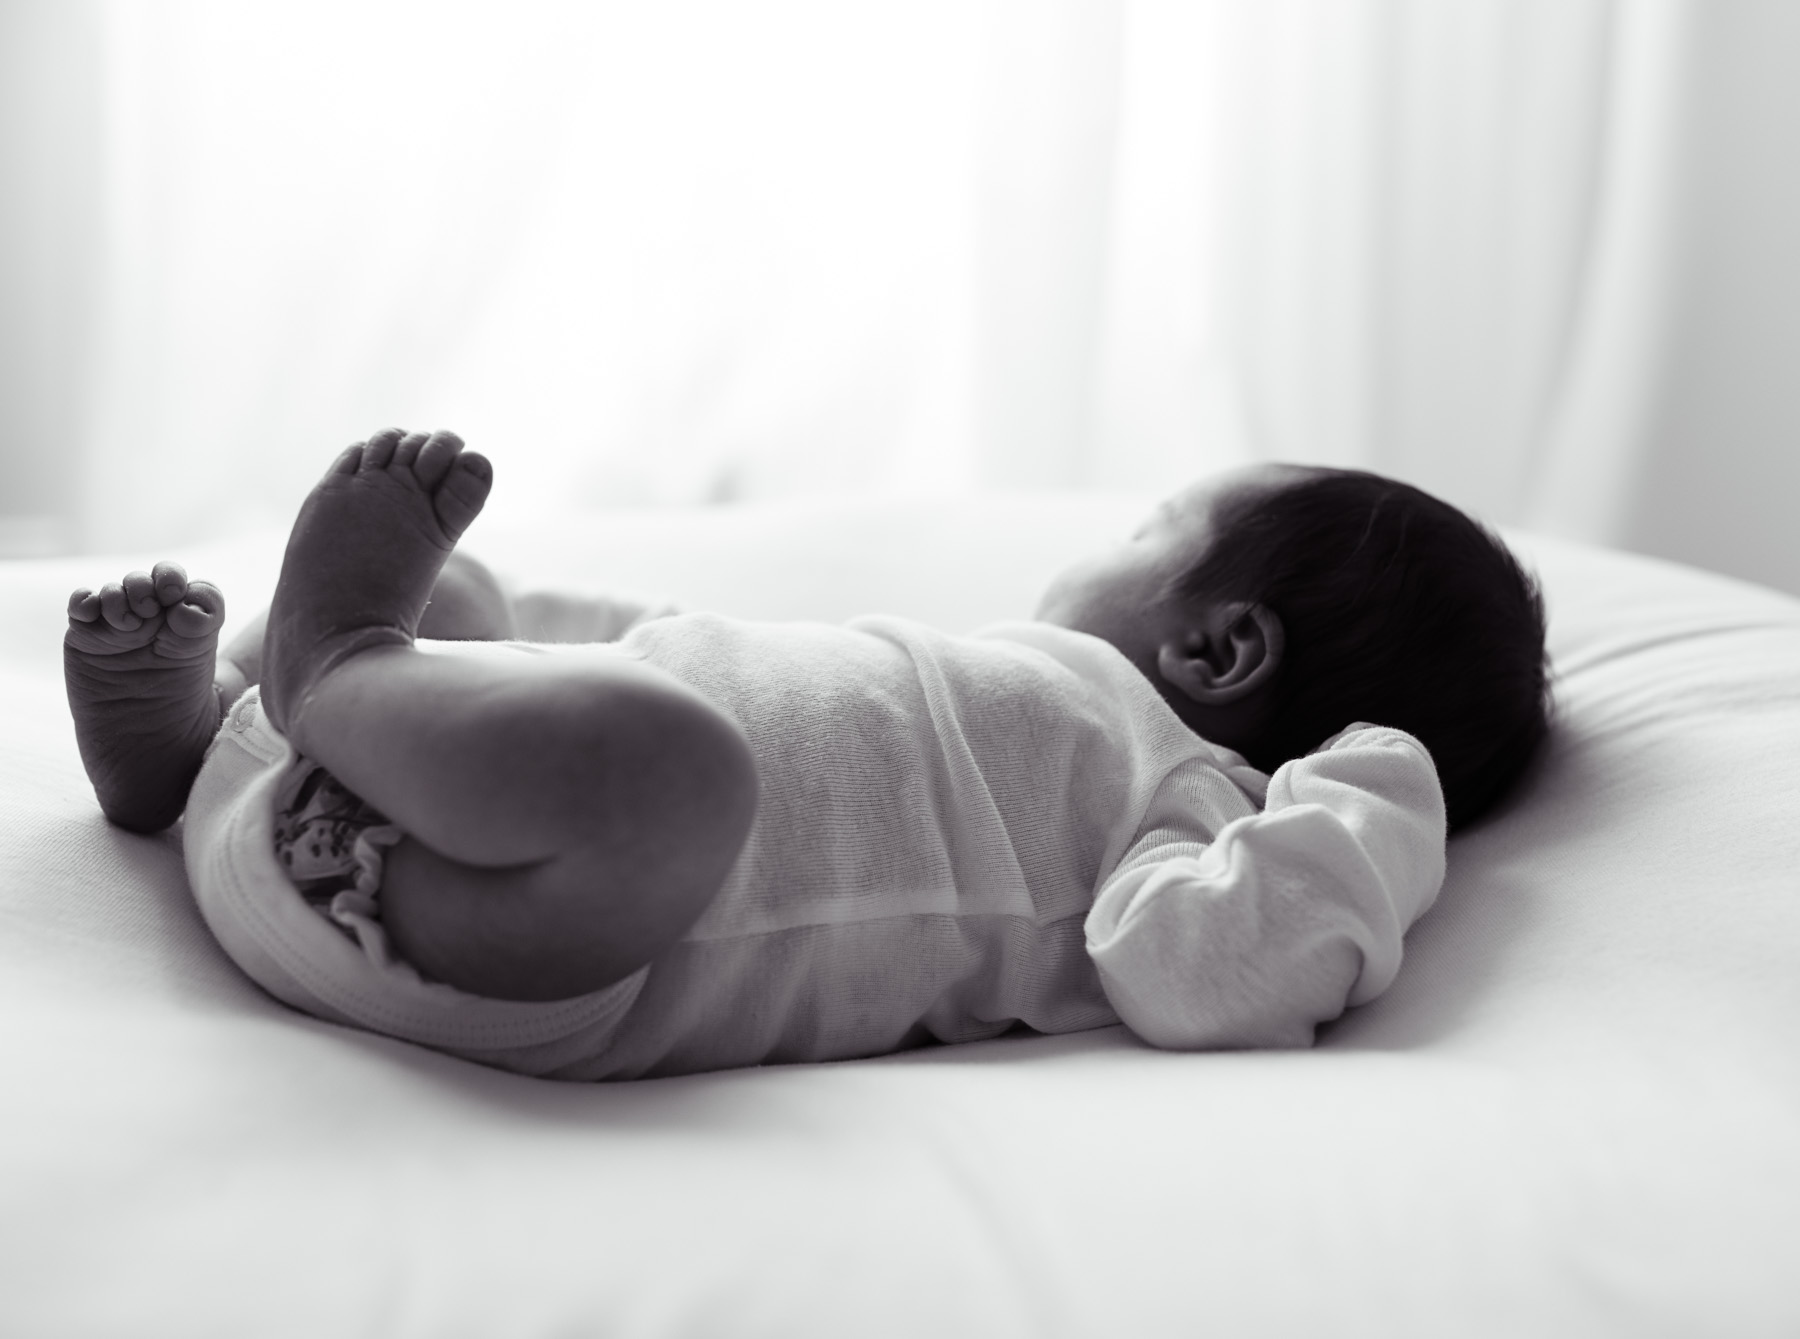 Natural unposed newborn images | Anna Wisjo Photography